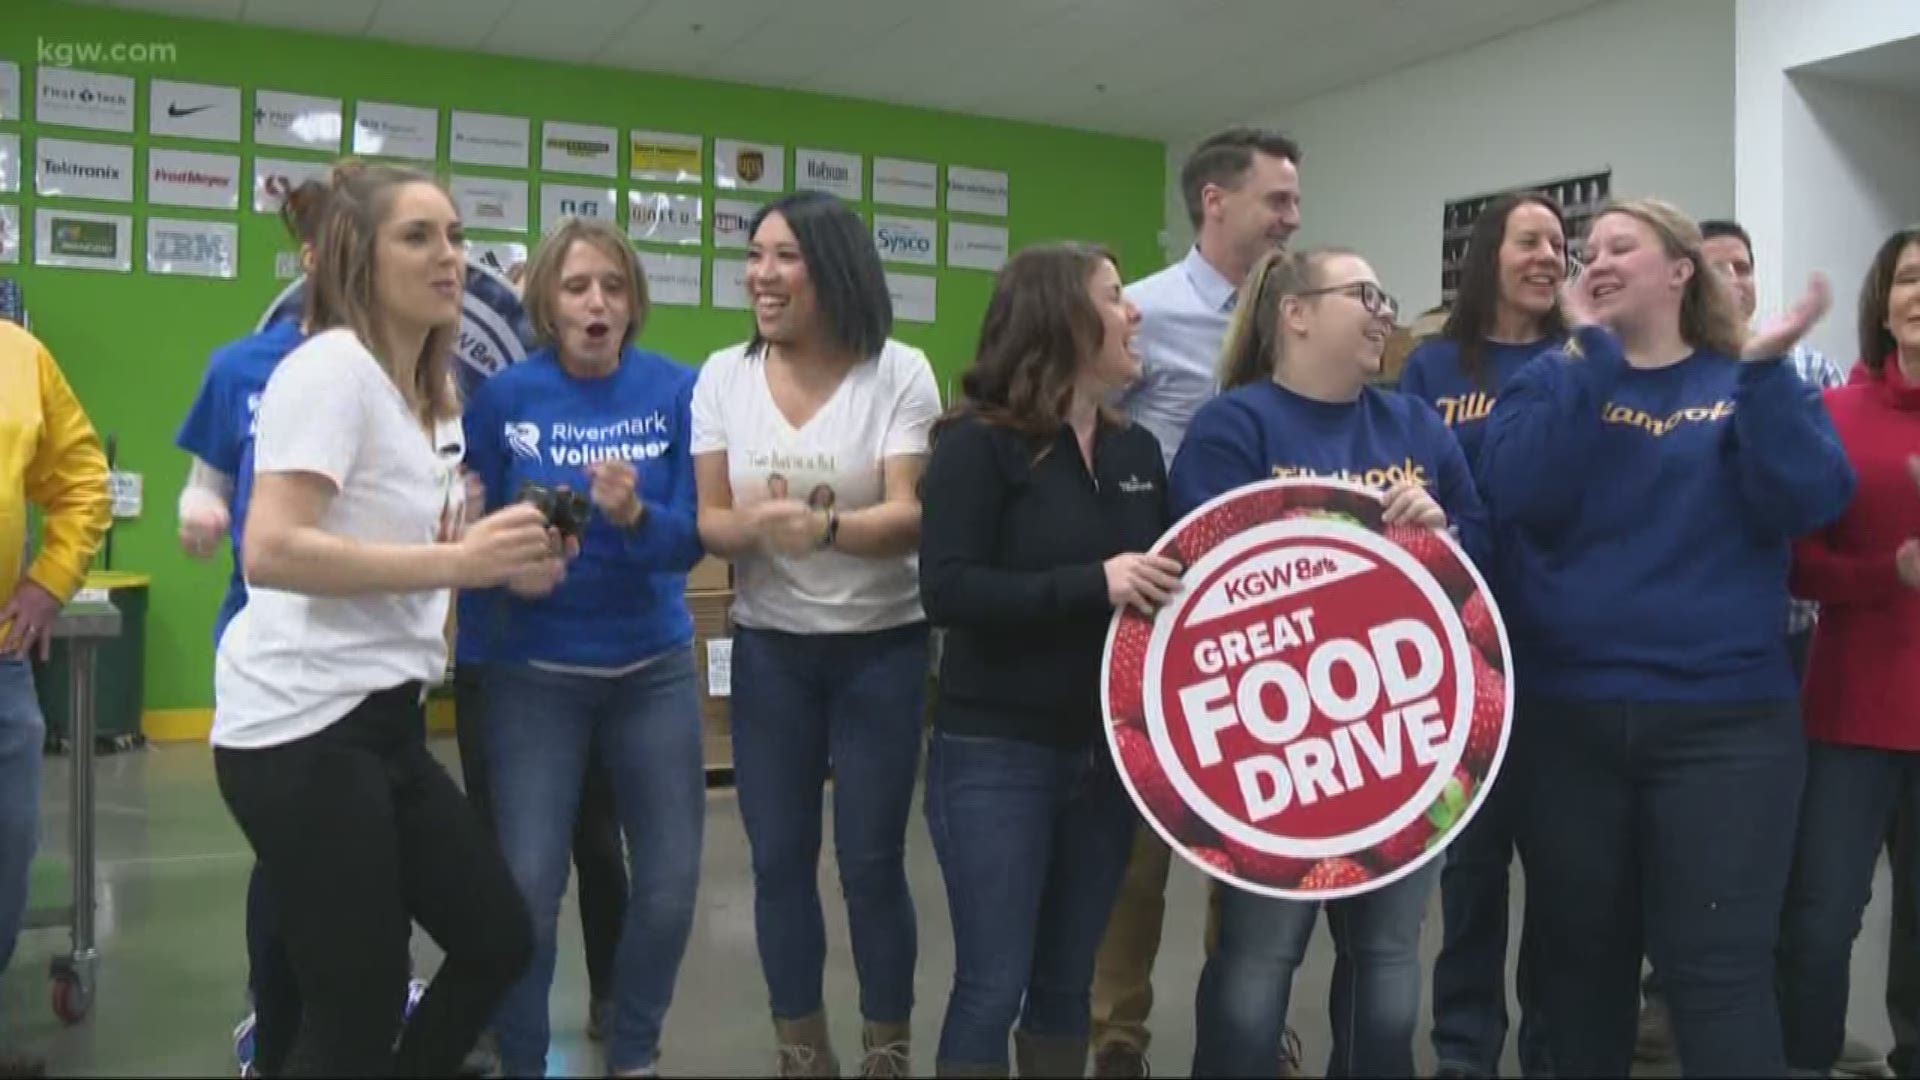 The KGW Great Food drive is underway. You can donate through March 31st. Our goal is to collect 1 million pounds of food.

kgw.com/fooddrive

#TonightwithCassidy